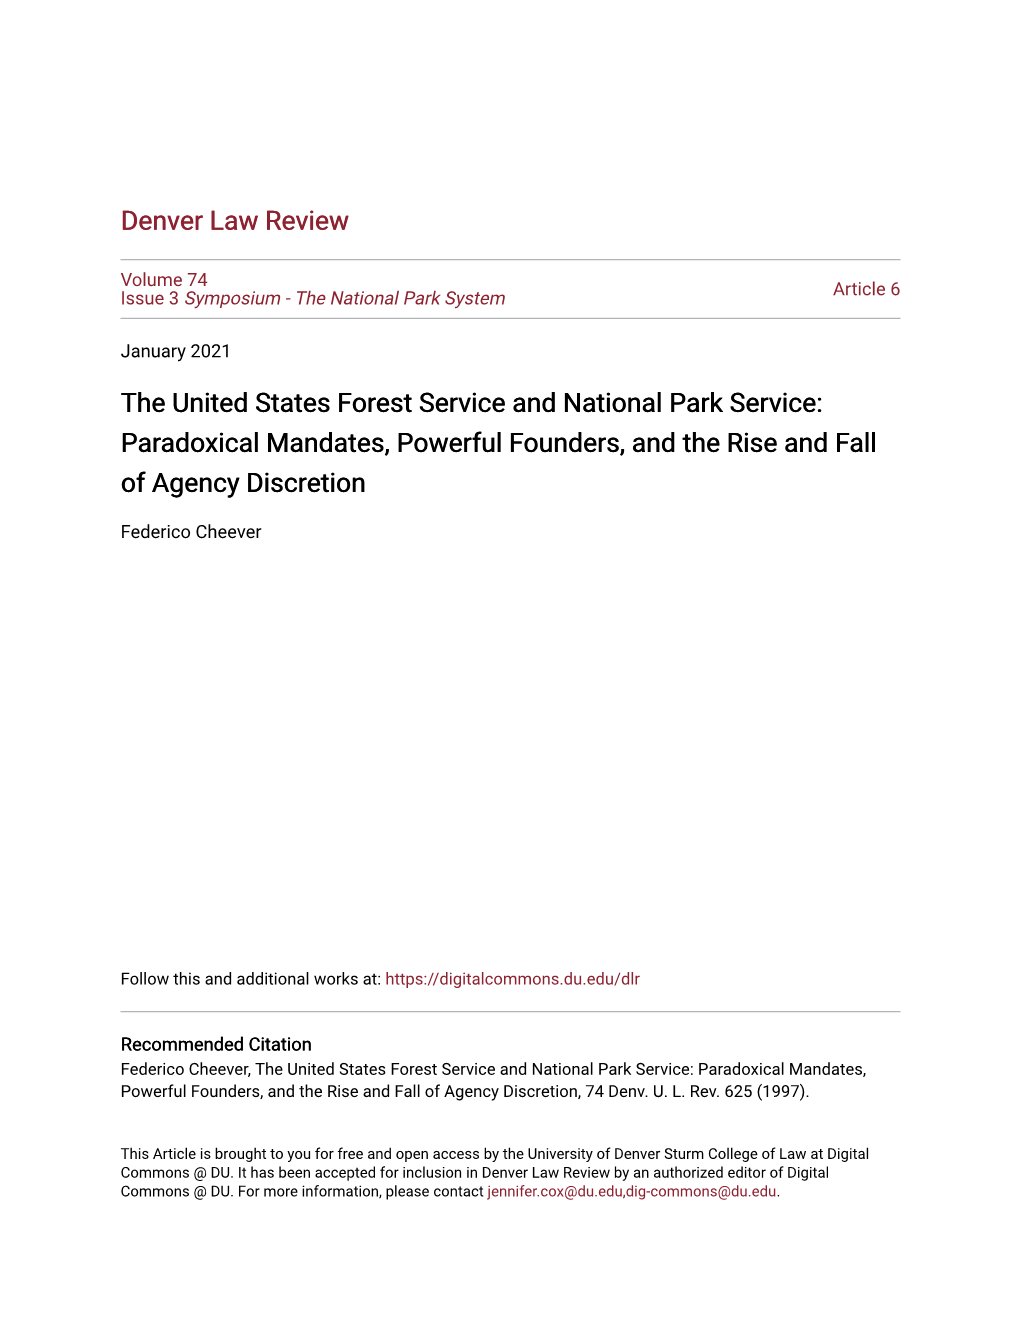 The United States Forest Service and National Park Service: Paradoxical Mandates, Powerful Founders, and the Rise and Fall of Agency Discretion